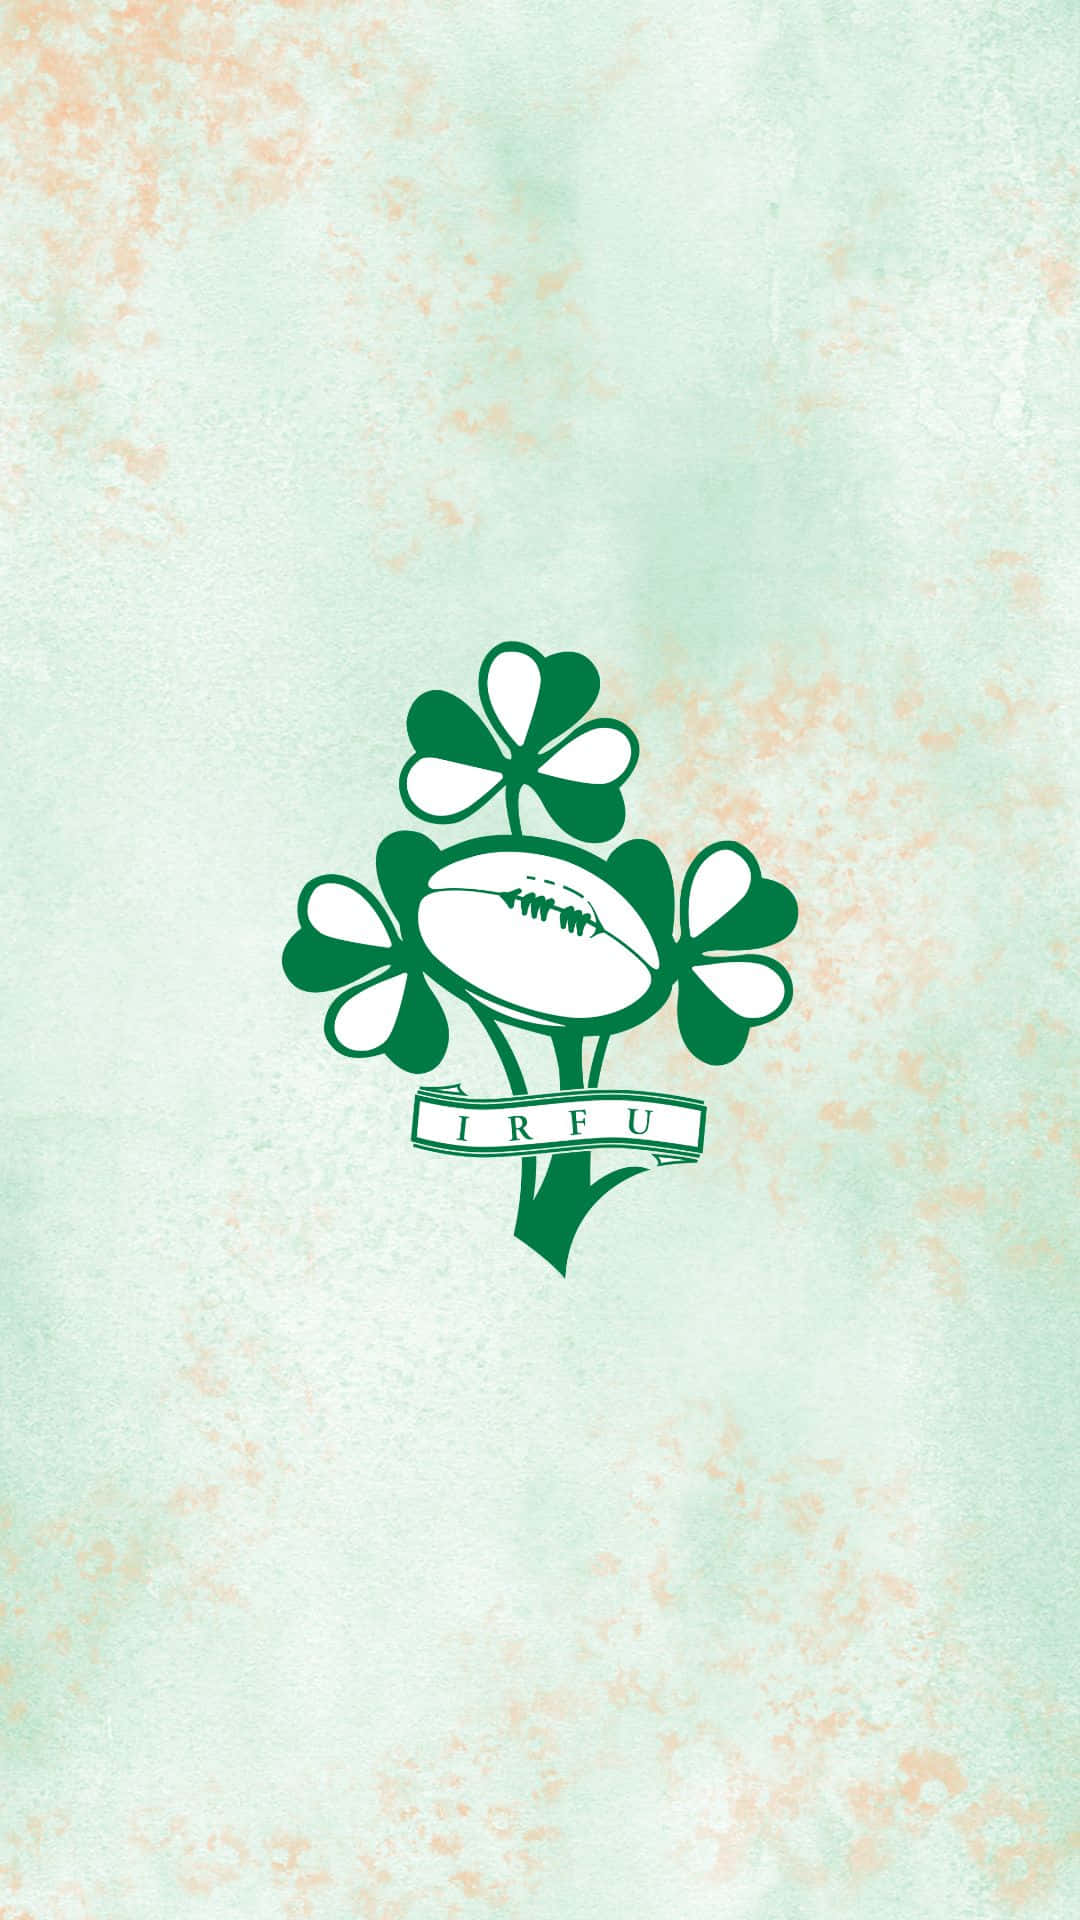 Caption: Ireland Rugby Team in Action Wallpaper